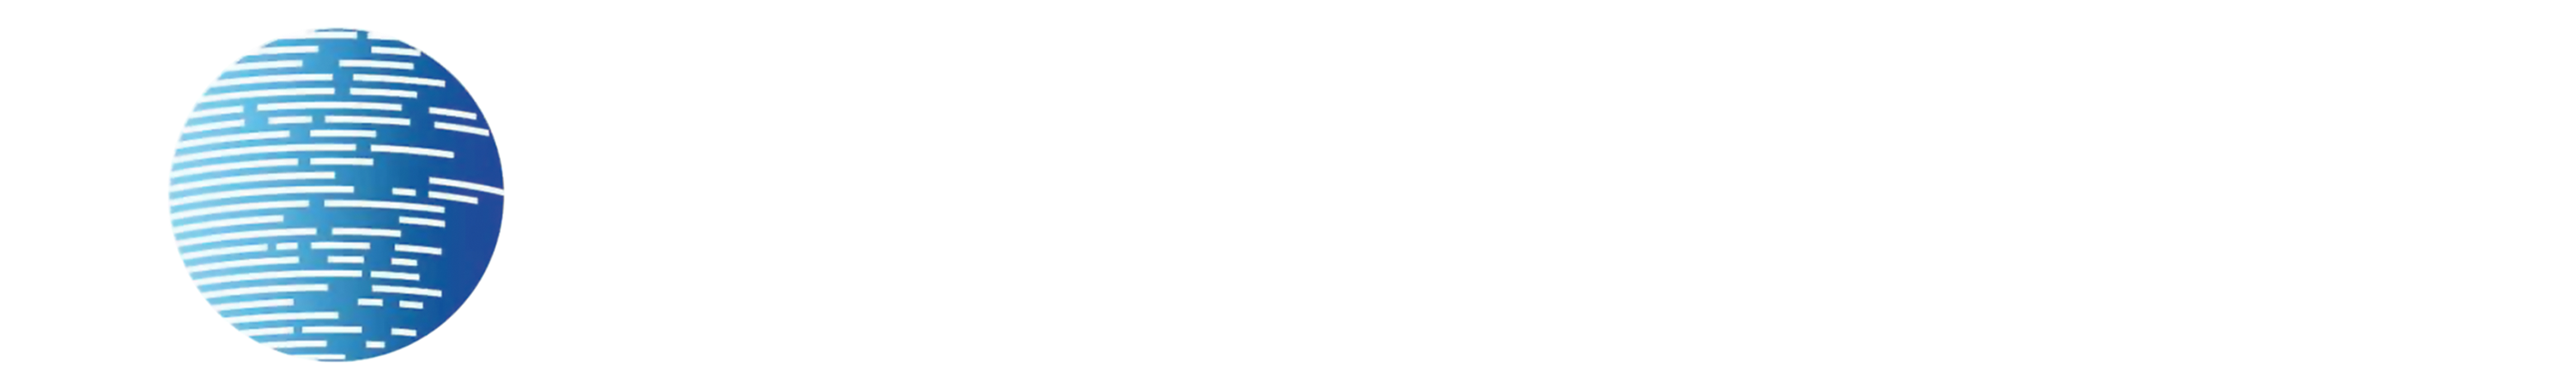 Worldwide City Group | WCG | Worldwide City Holdings | WCH | Global Management and Investment